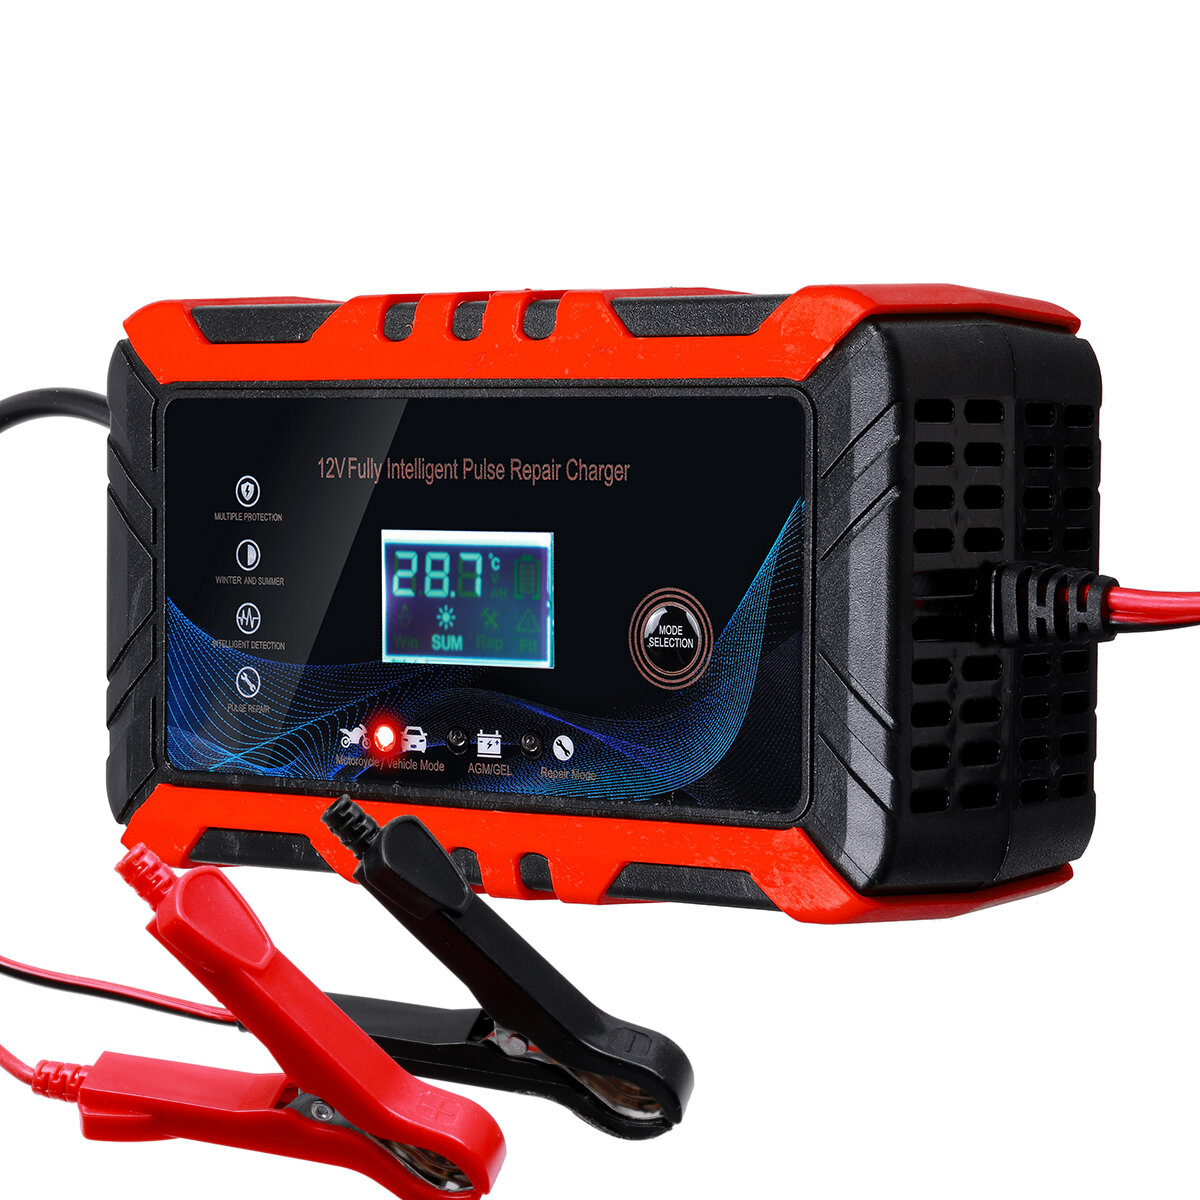 12V 6A Pulse Repair Battery Charger LCD Display Accumulator Charging AGM/GEL Lead-acid Batteries Charging Touch Screen Control